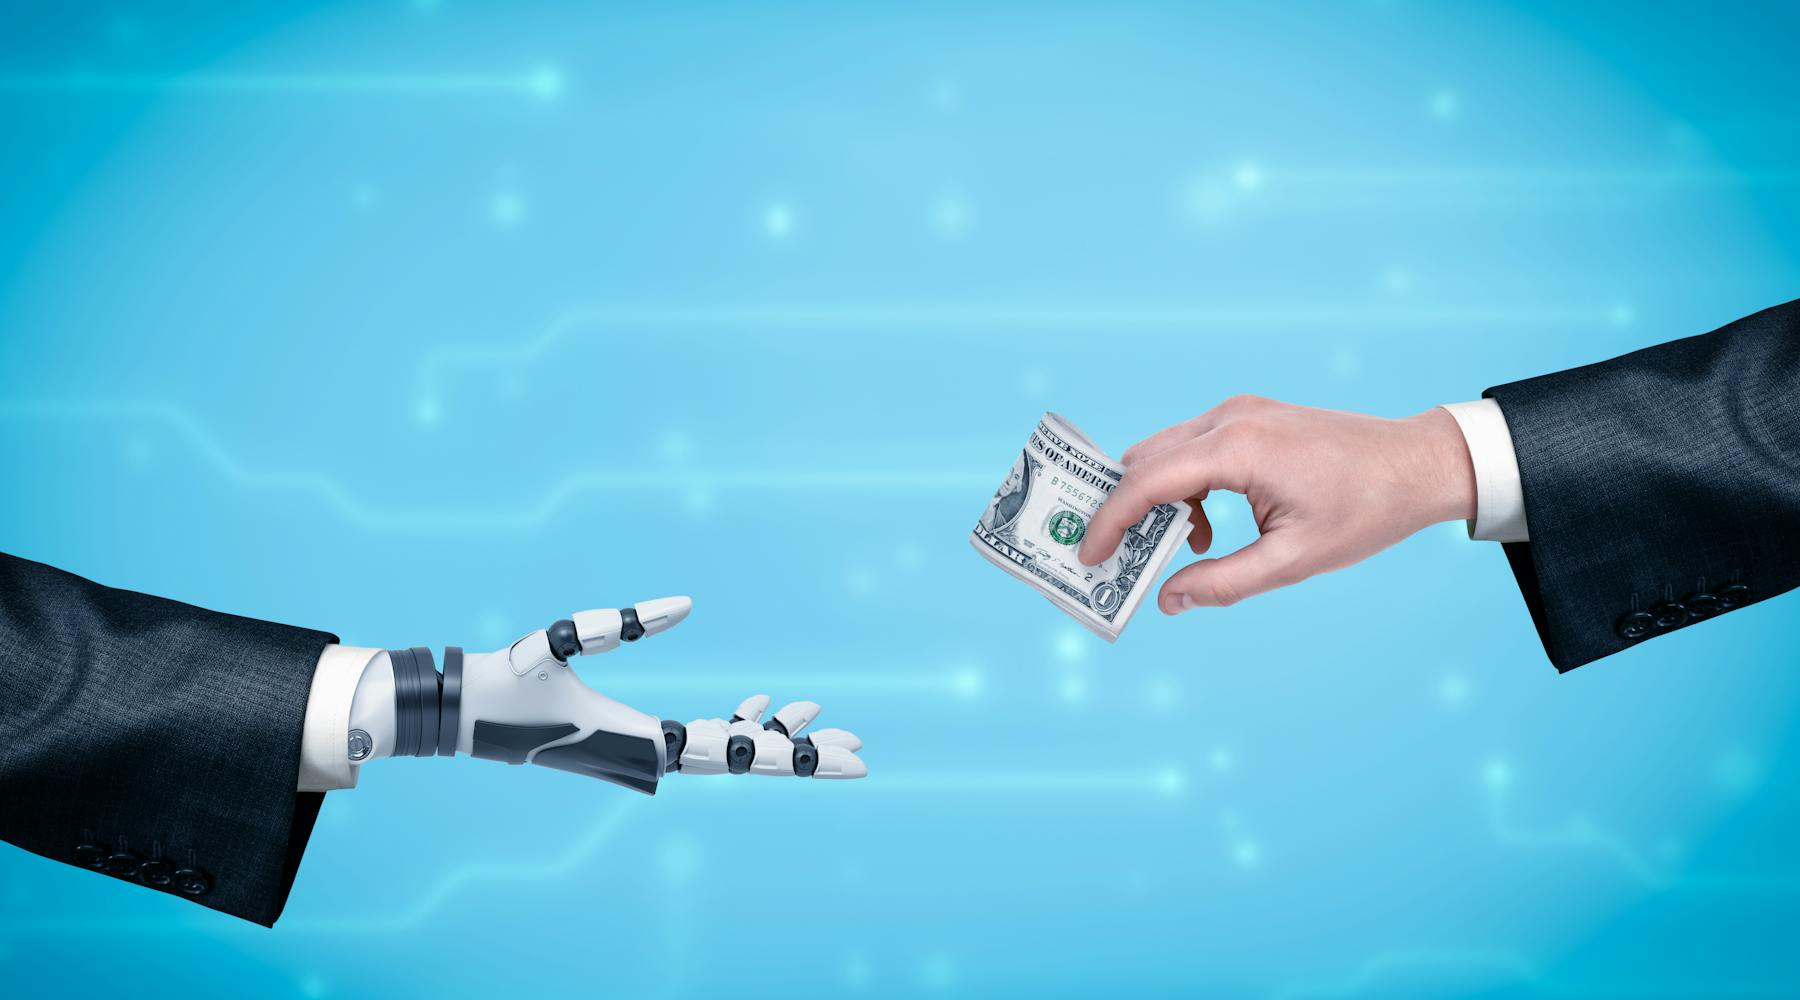 How to make money with AI: 6 proven ways